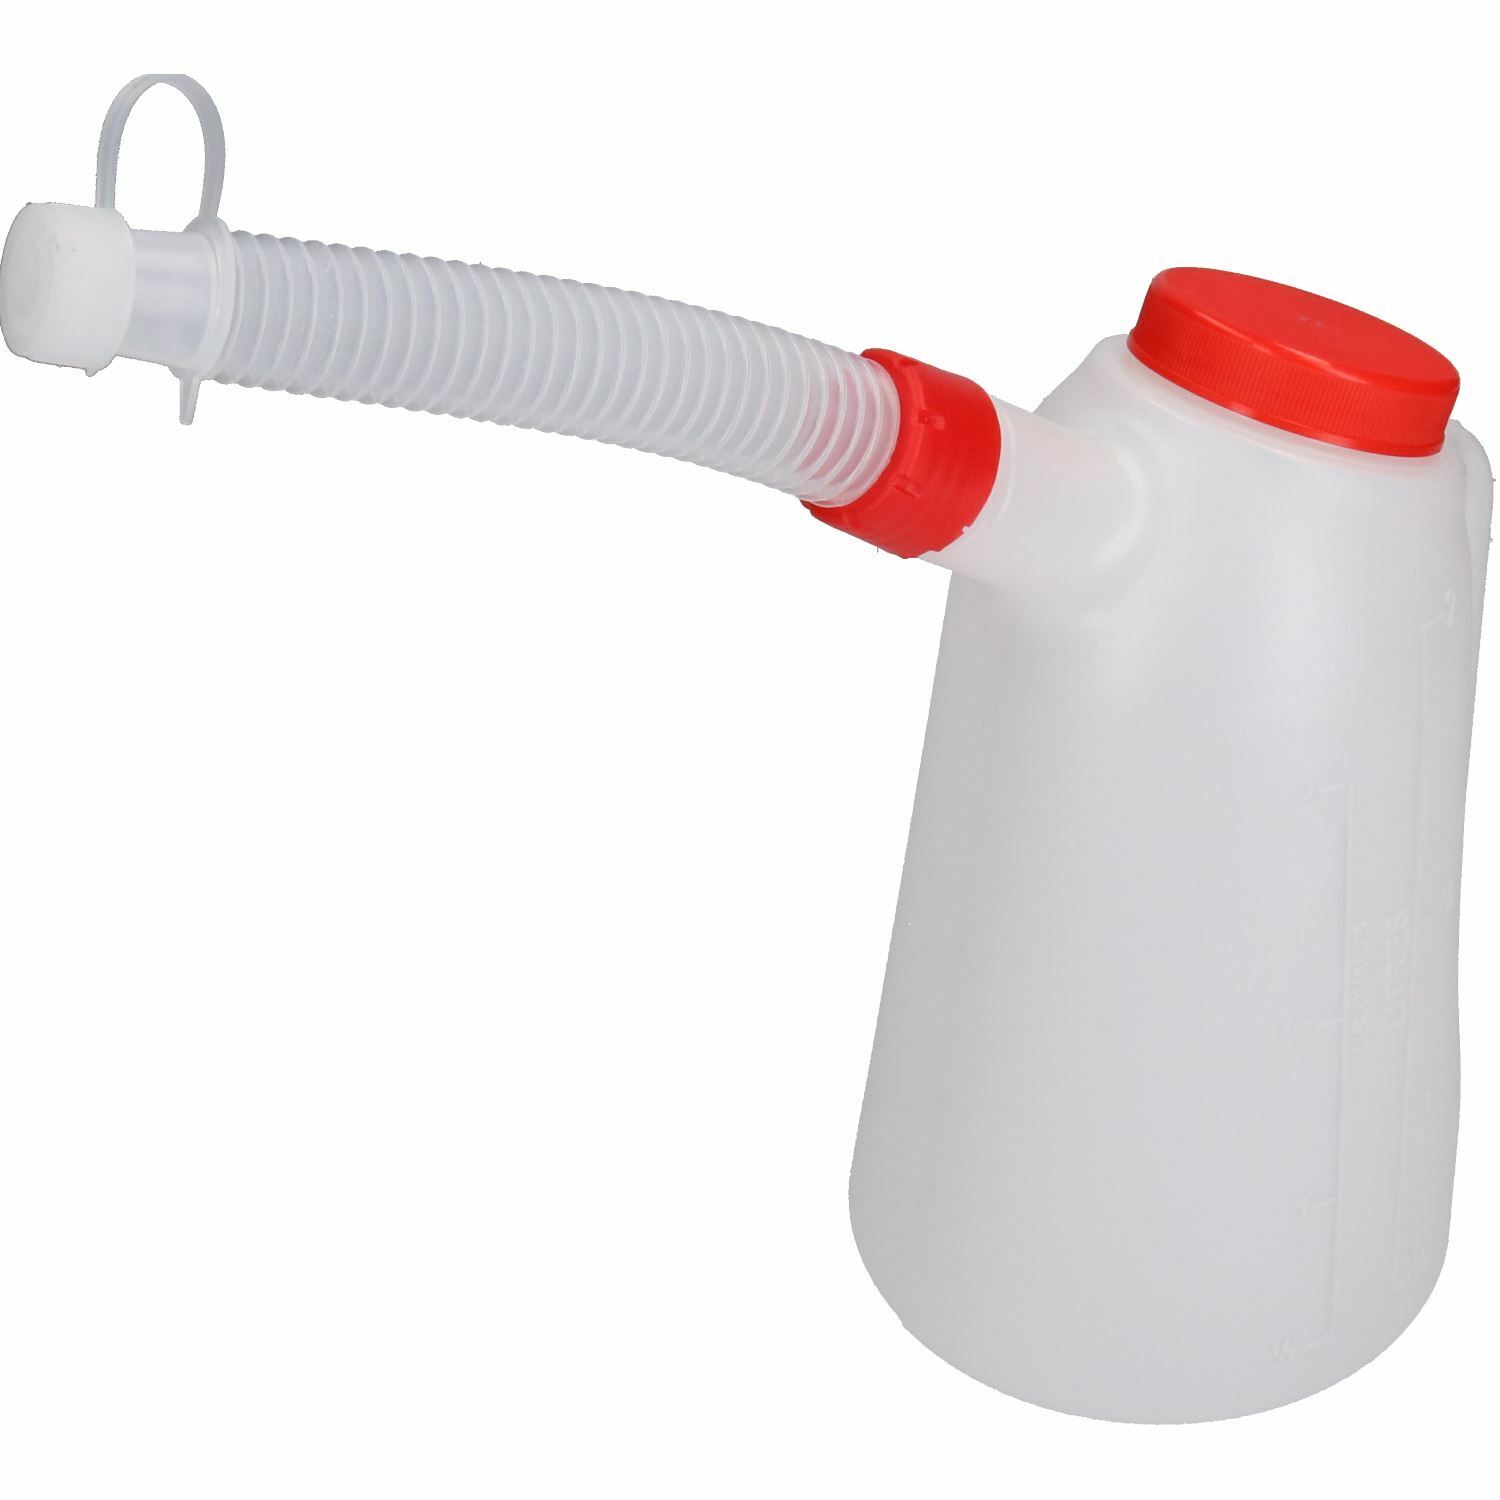 Measuring Pouring Jug 2ltr Capacity With Flexible Spout For Fuels Liquids Water